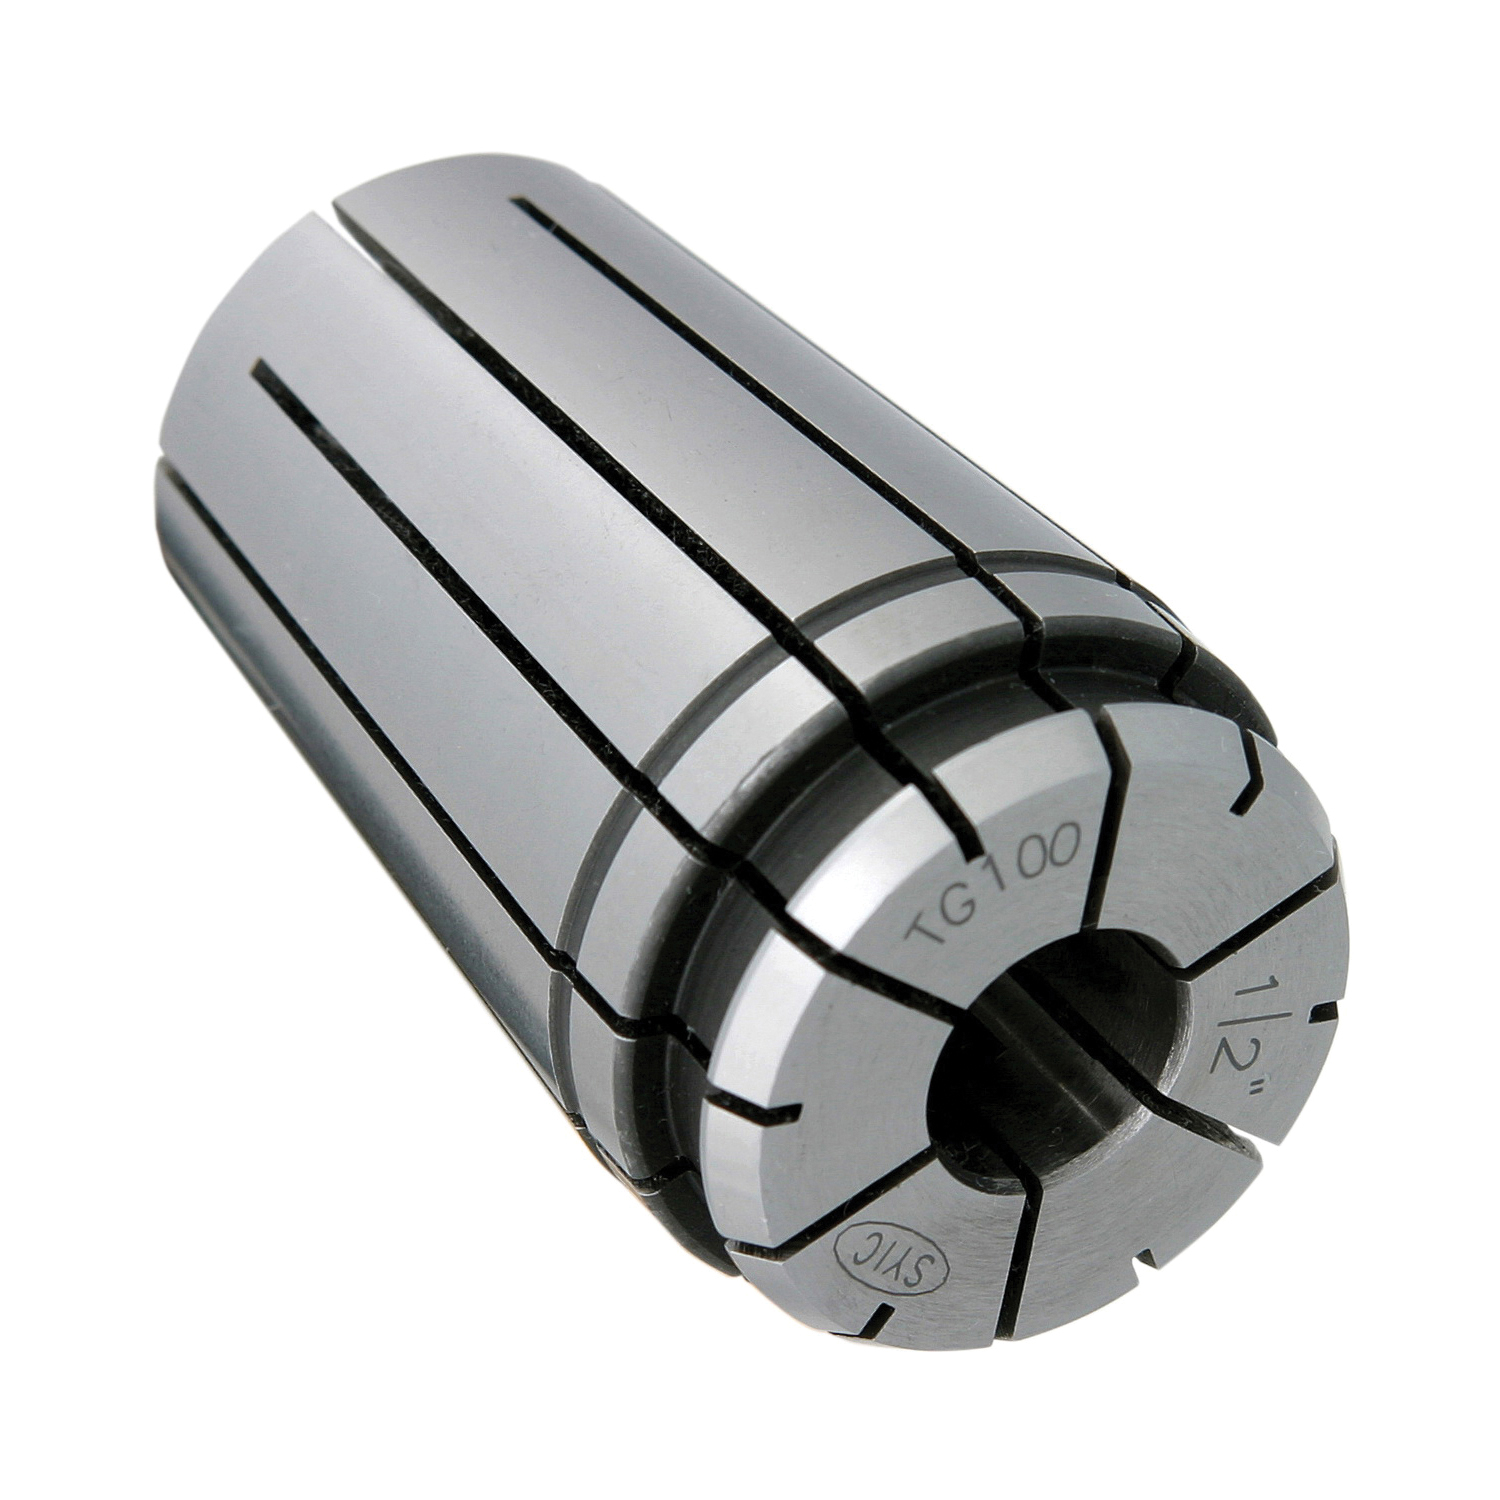 TG100 61/64" COLLET